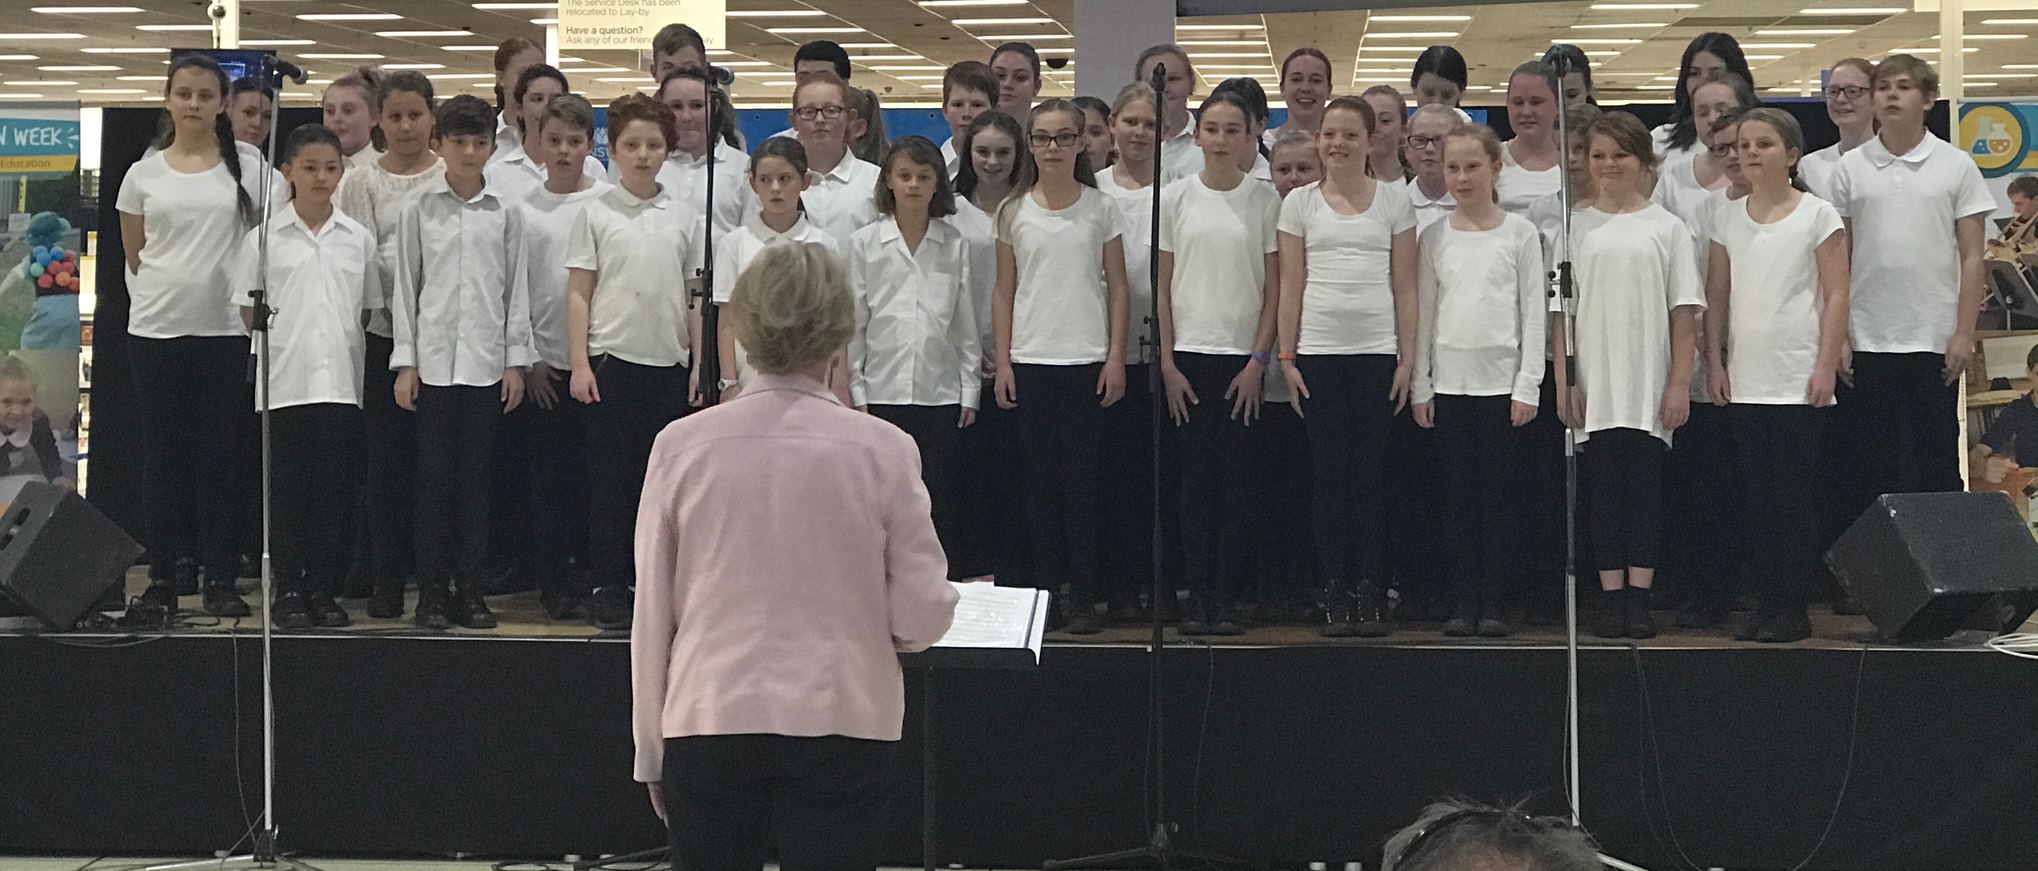 students choir on a portable stage with conductor in front of them.  Students wearing white tshirts and black pants